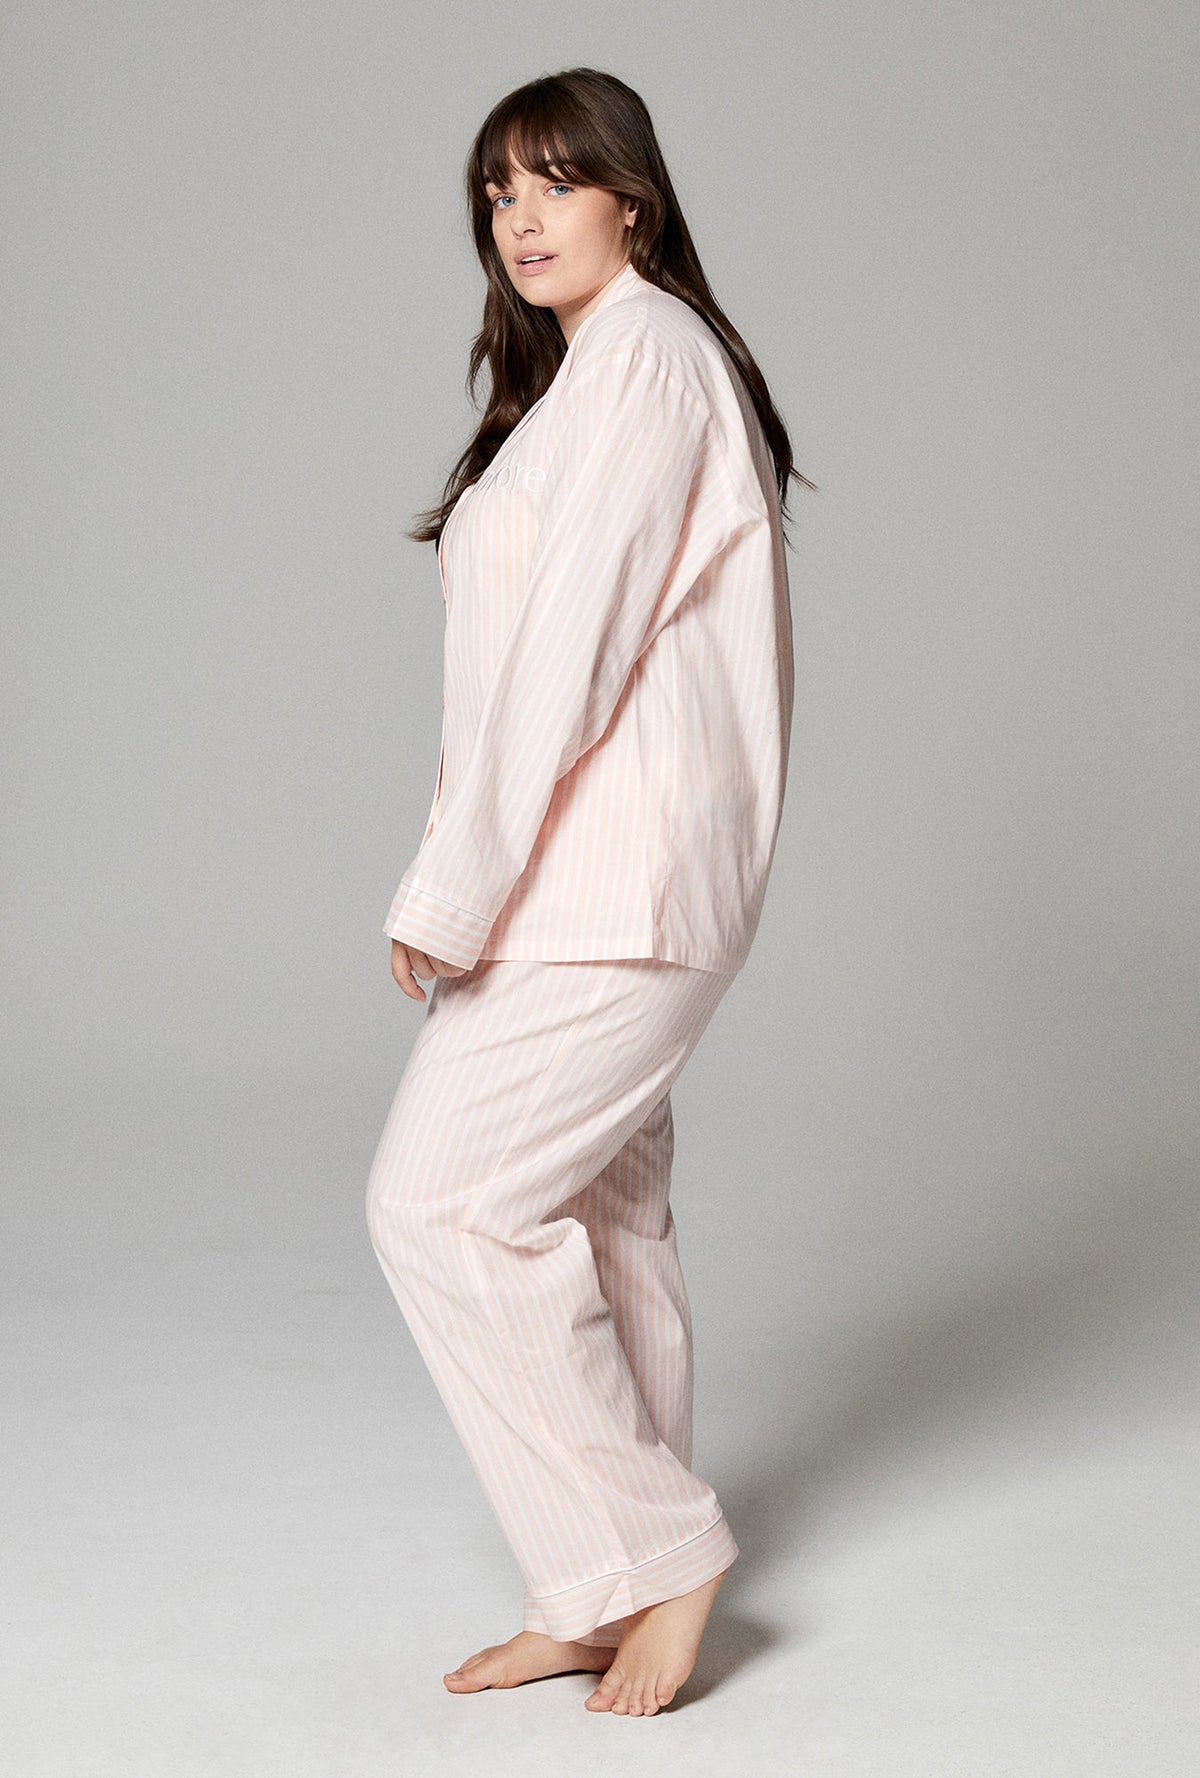 A lady wearing pink long sleeve classic pj set with stripes